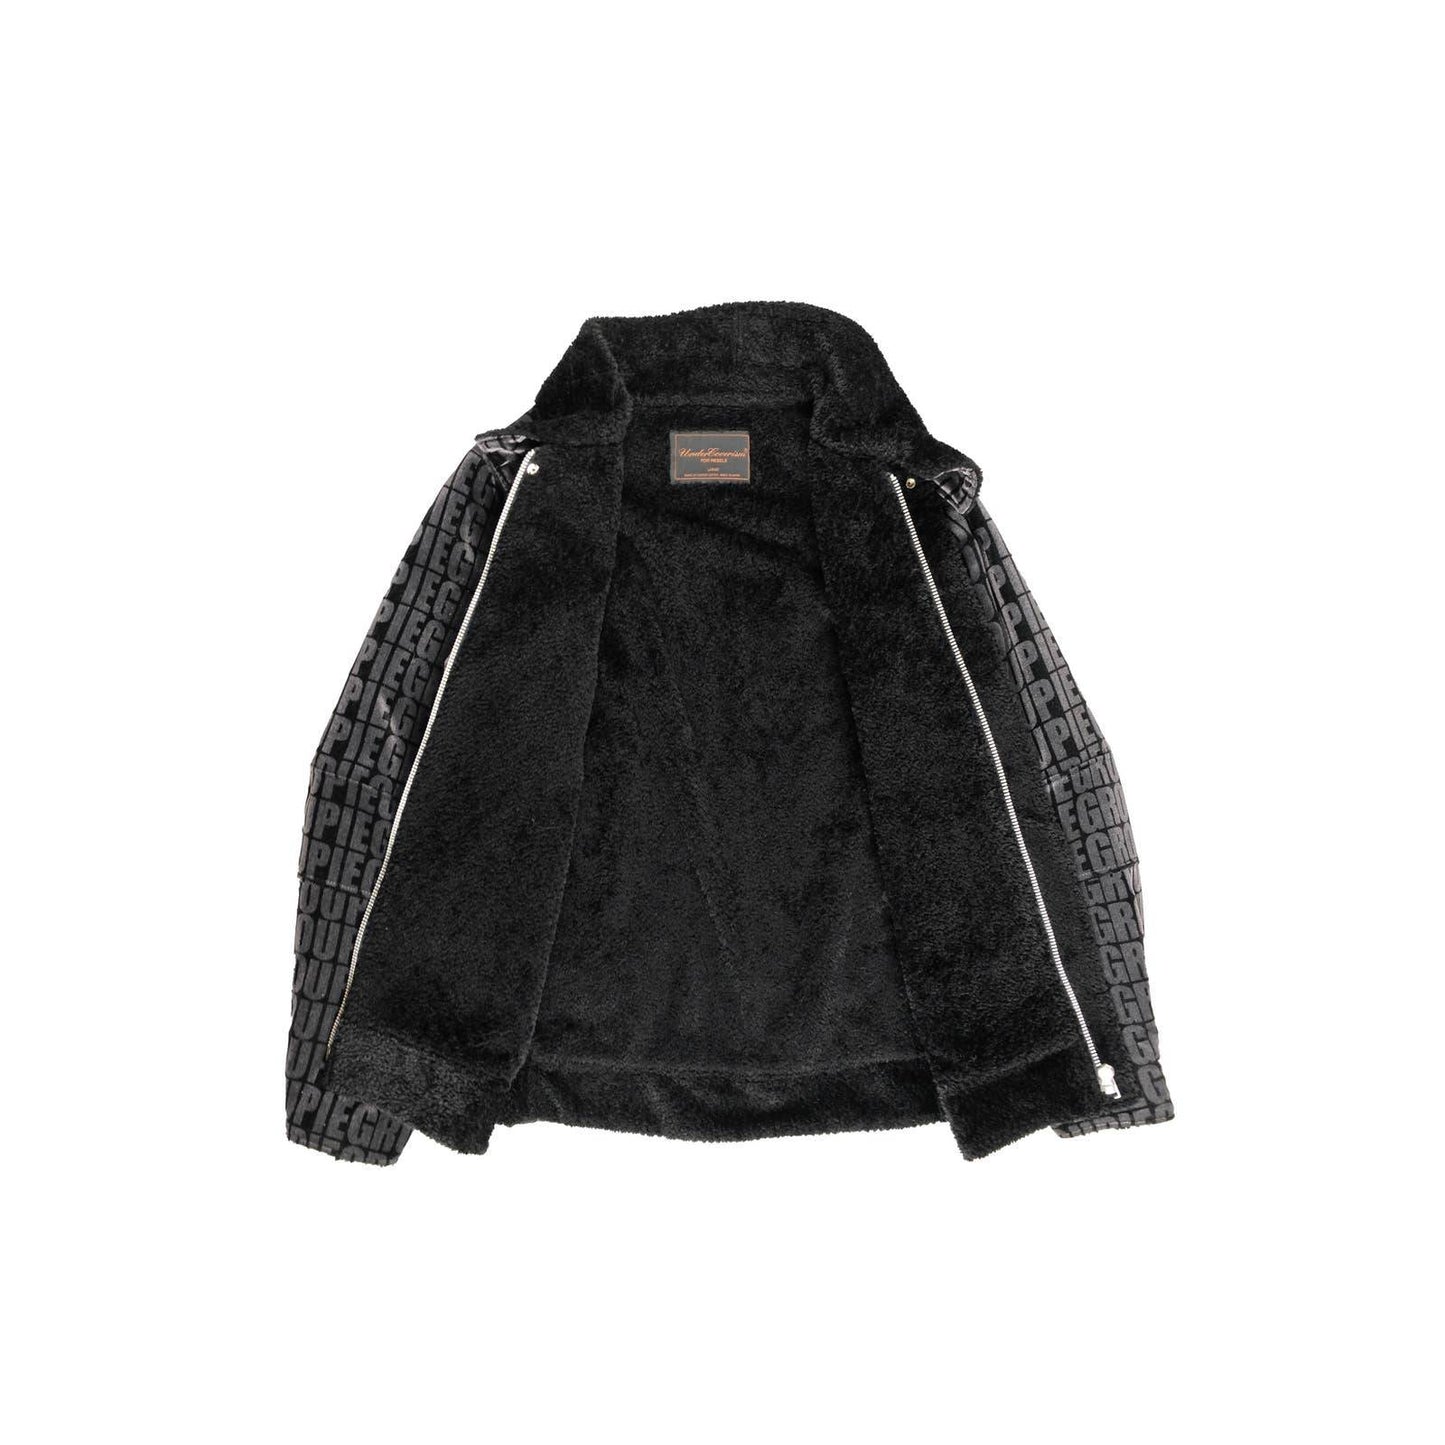 'Witch's Cell' Groupie Shearling Jacket - Groupie